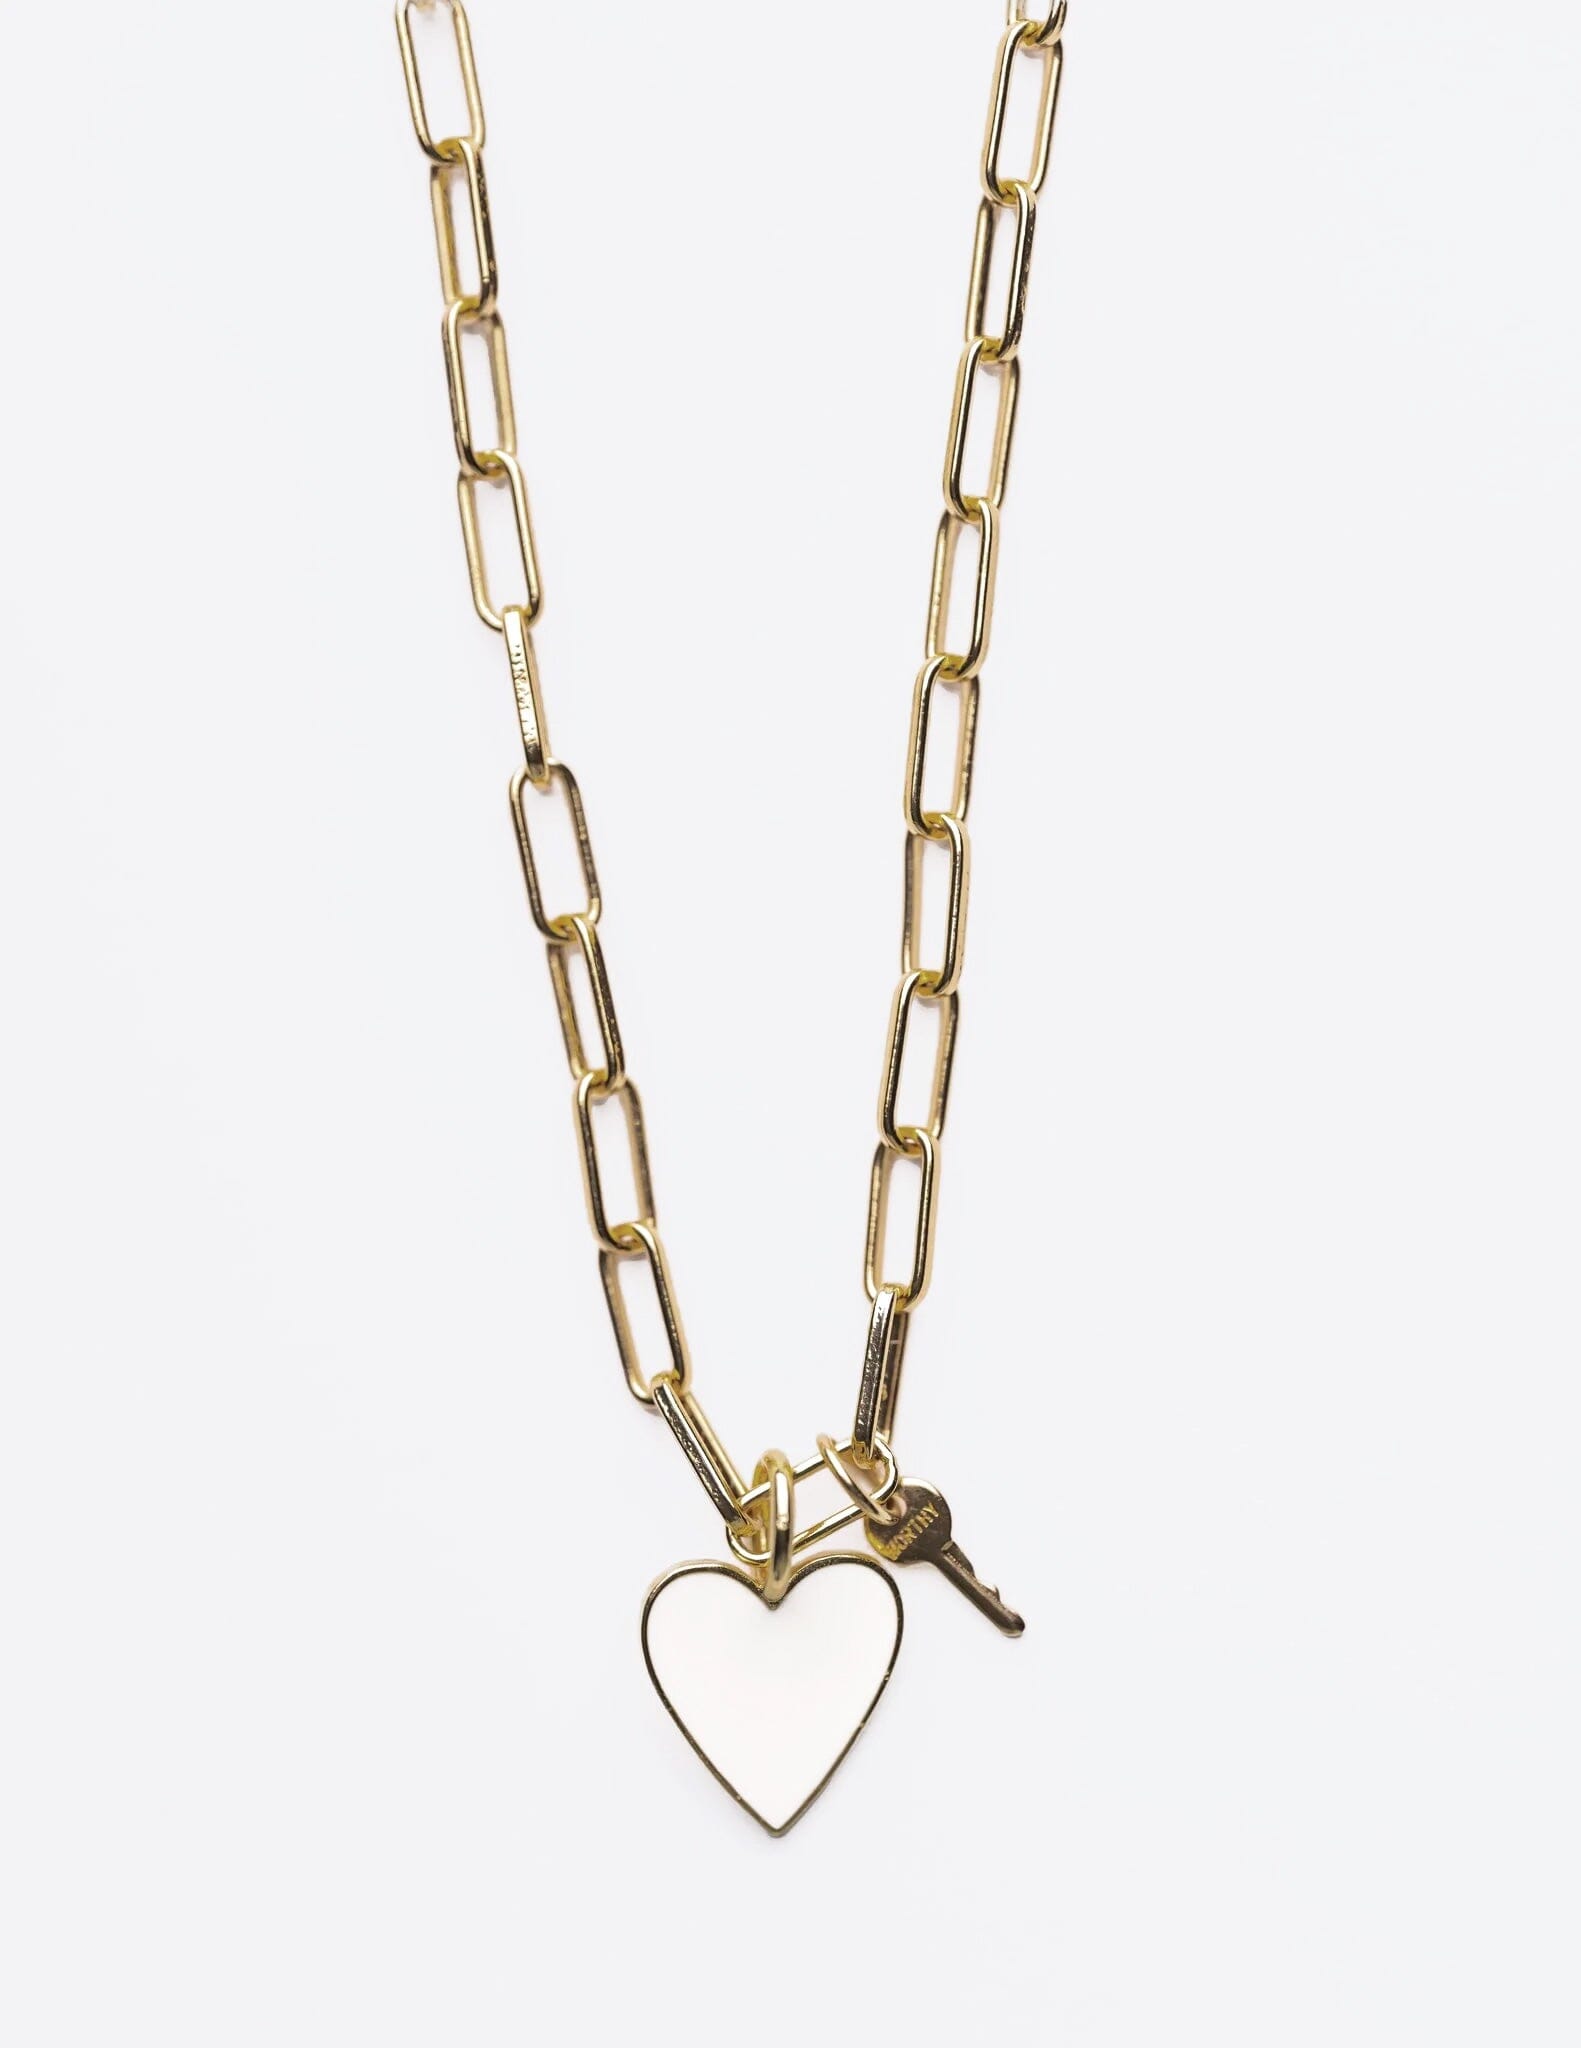 White Enamel Heart and Mini Key Brooklyn Necklace Necklaces The Giving Keys WORTHY 